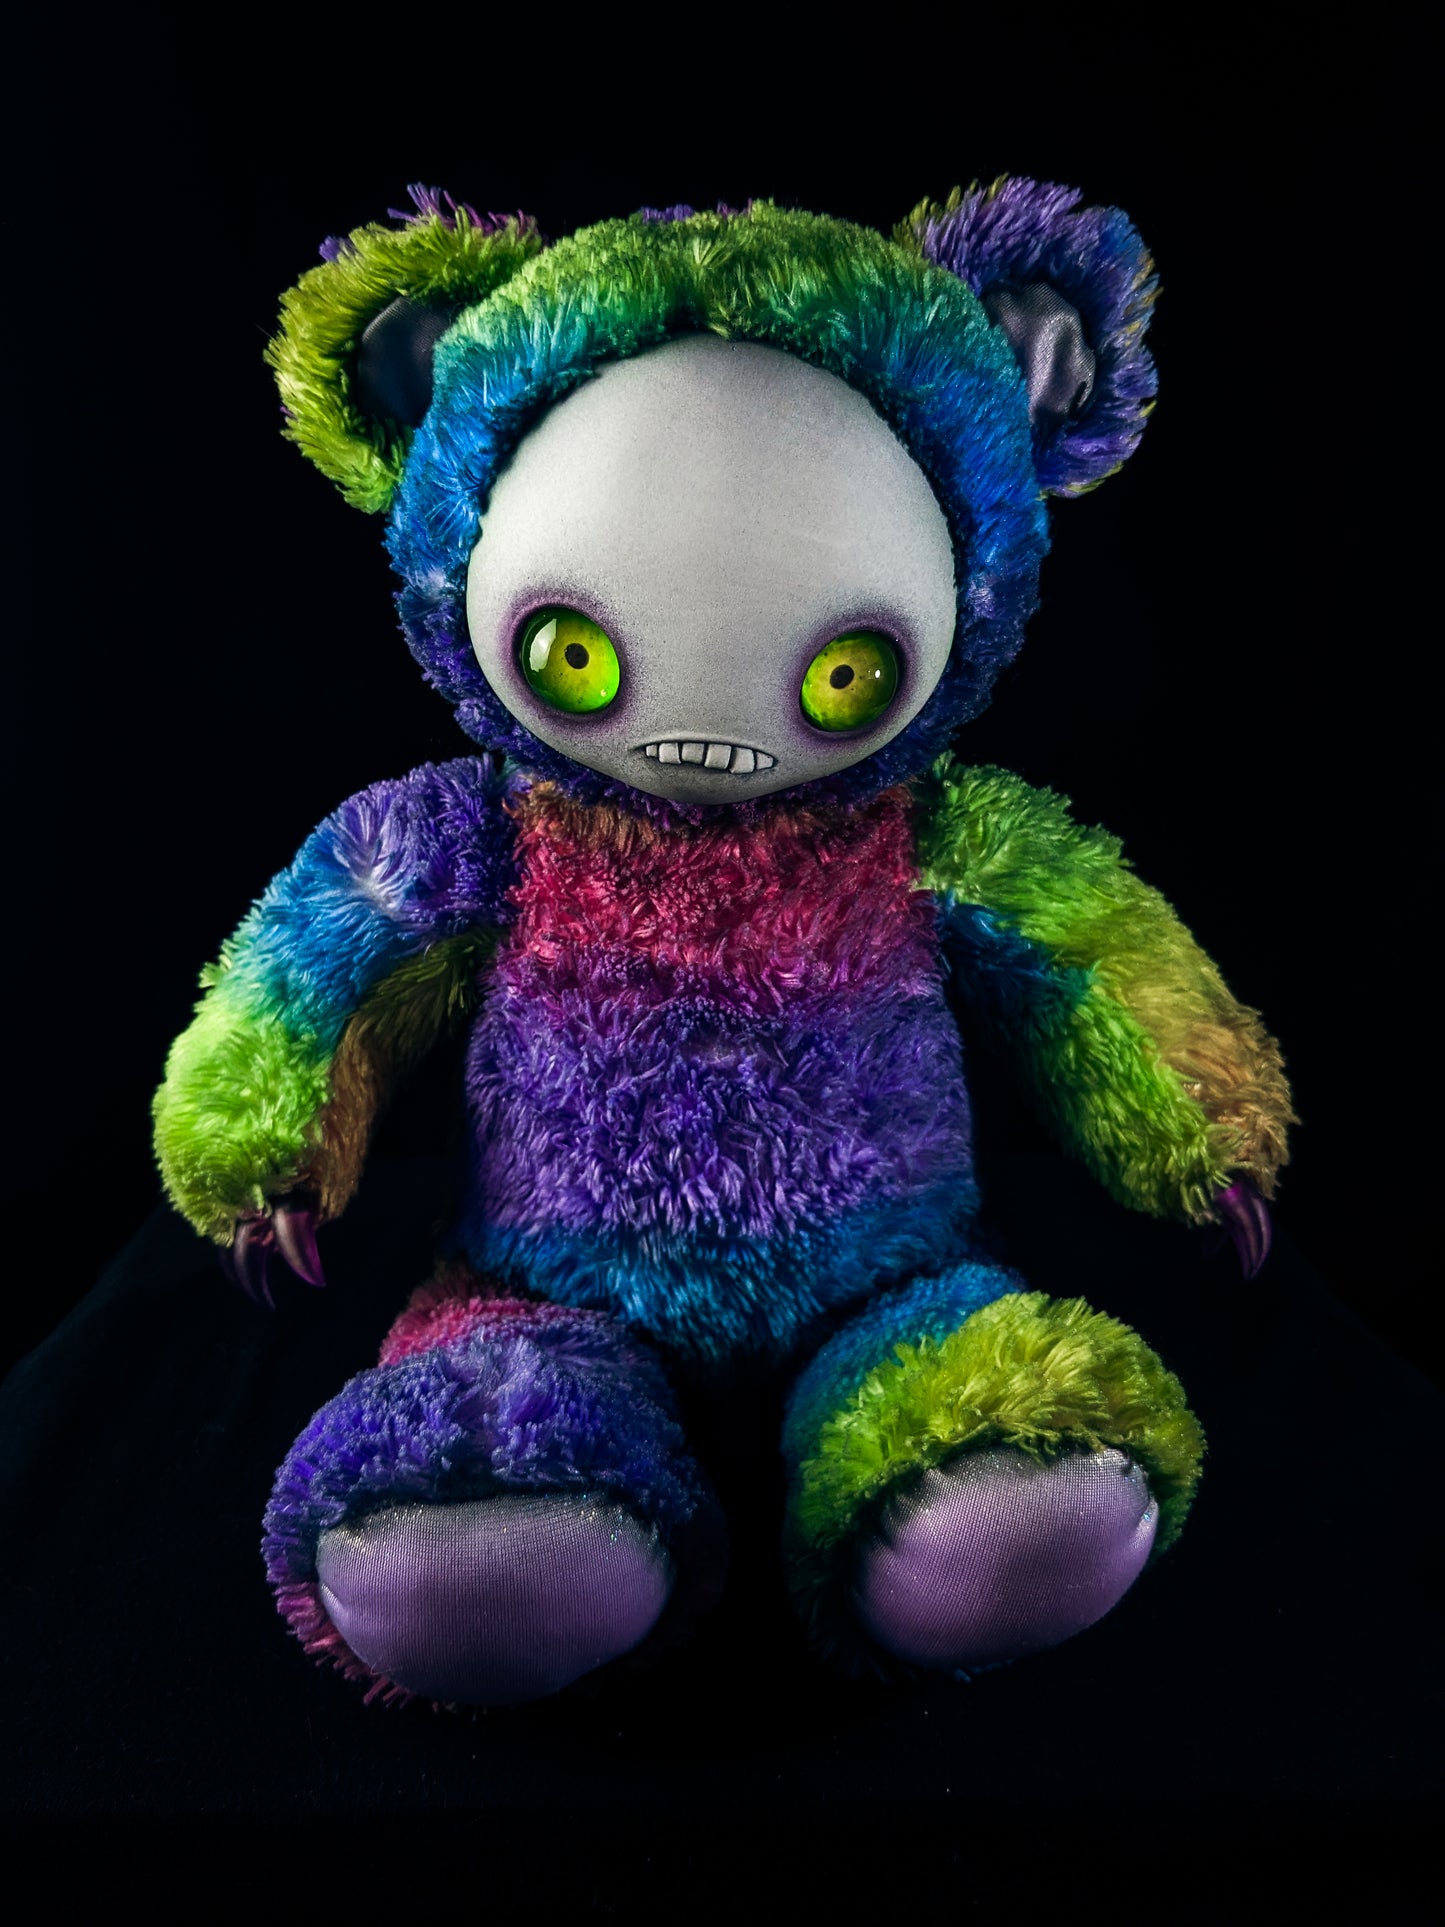 Psychedelic Haze: JITTERS - CRYPTCRITS Handcrafted Creepy Monster Art Doll Plush Toy for Unhinged Individuals